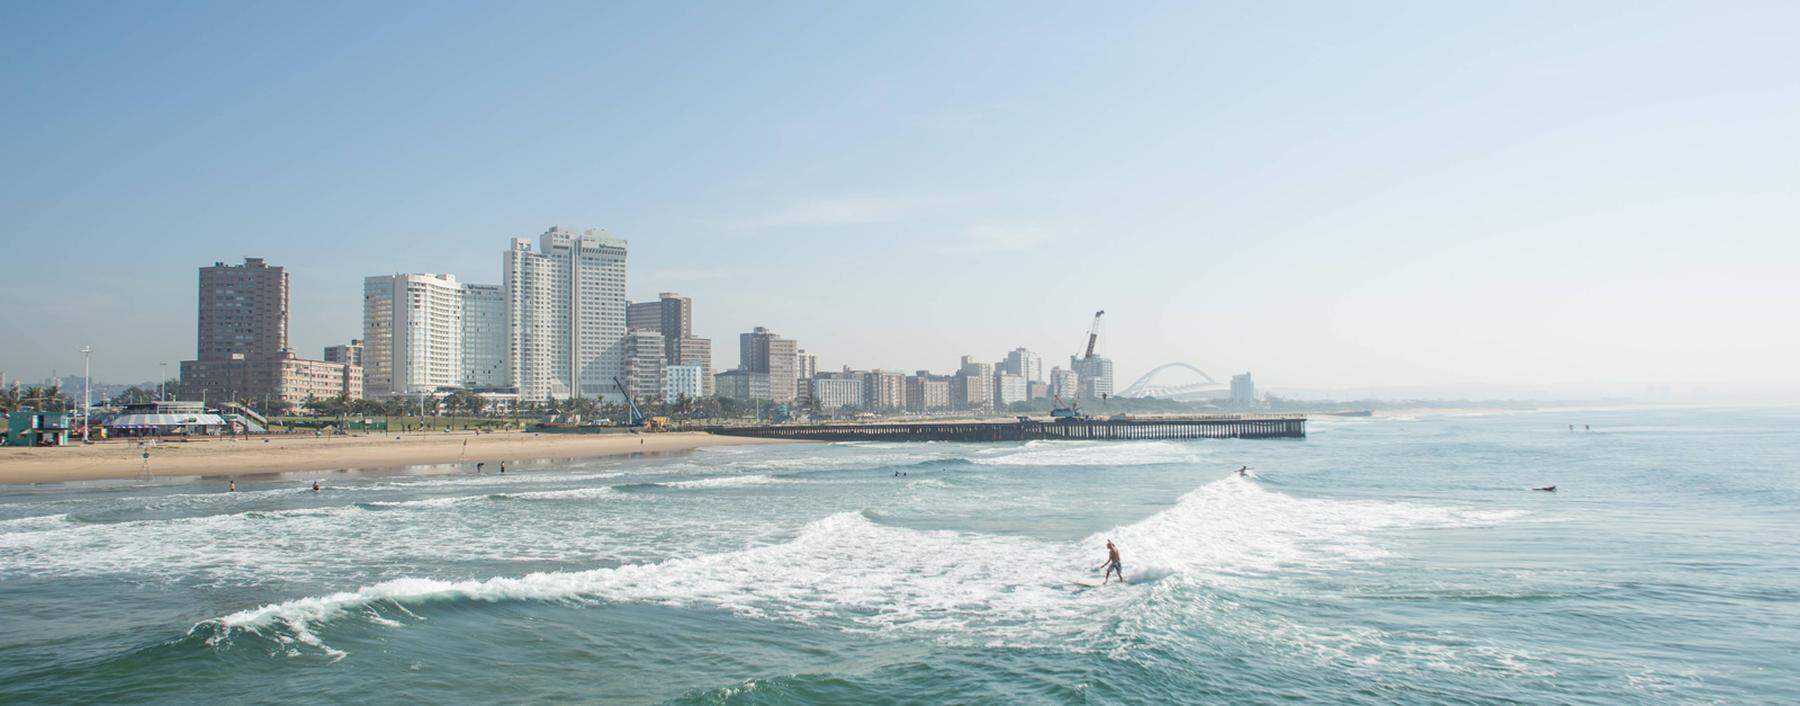 Surfers riding waves near pier on Golden Mile with skyline of Durban South Africa Durban KwaZulu N